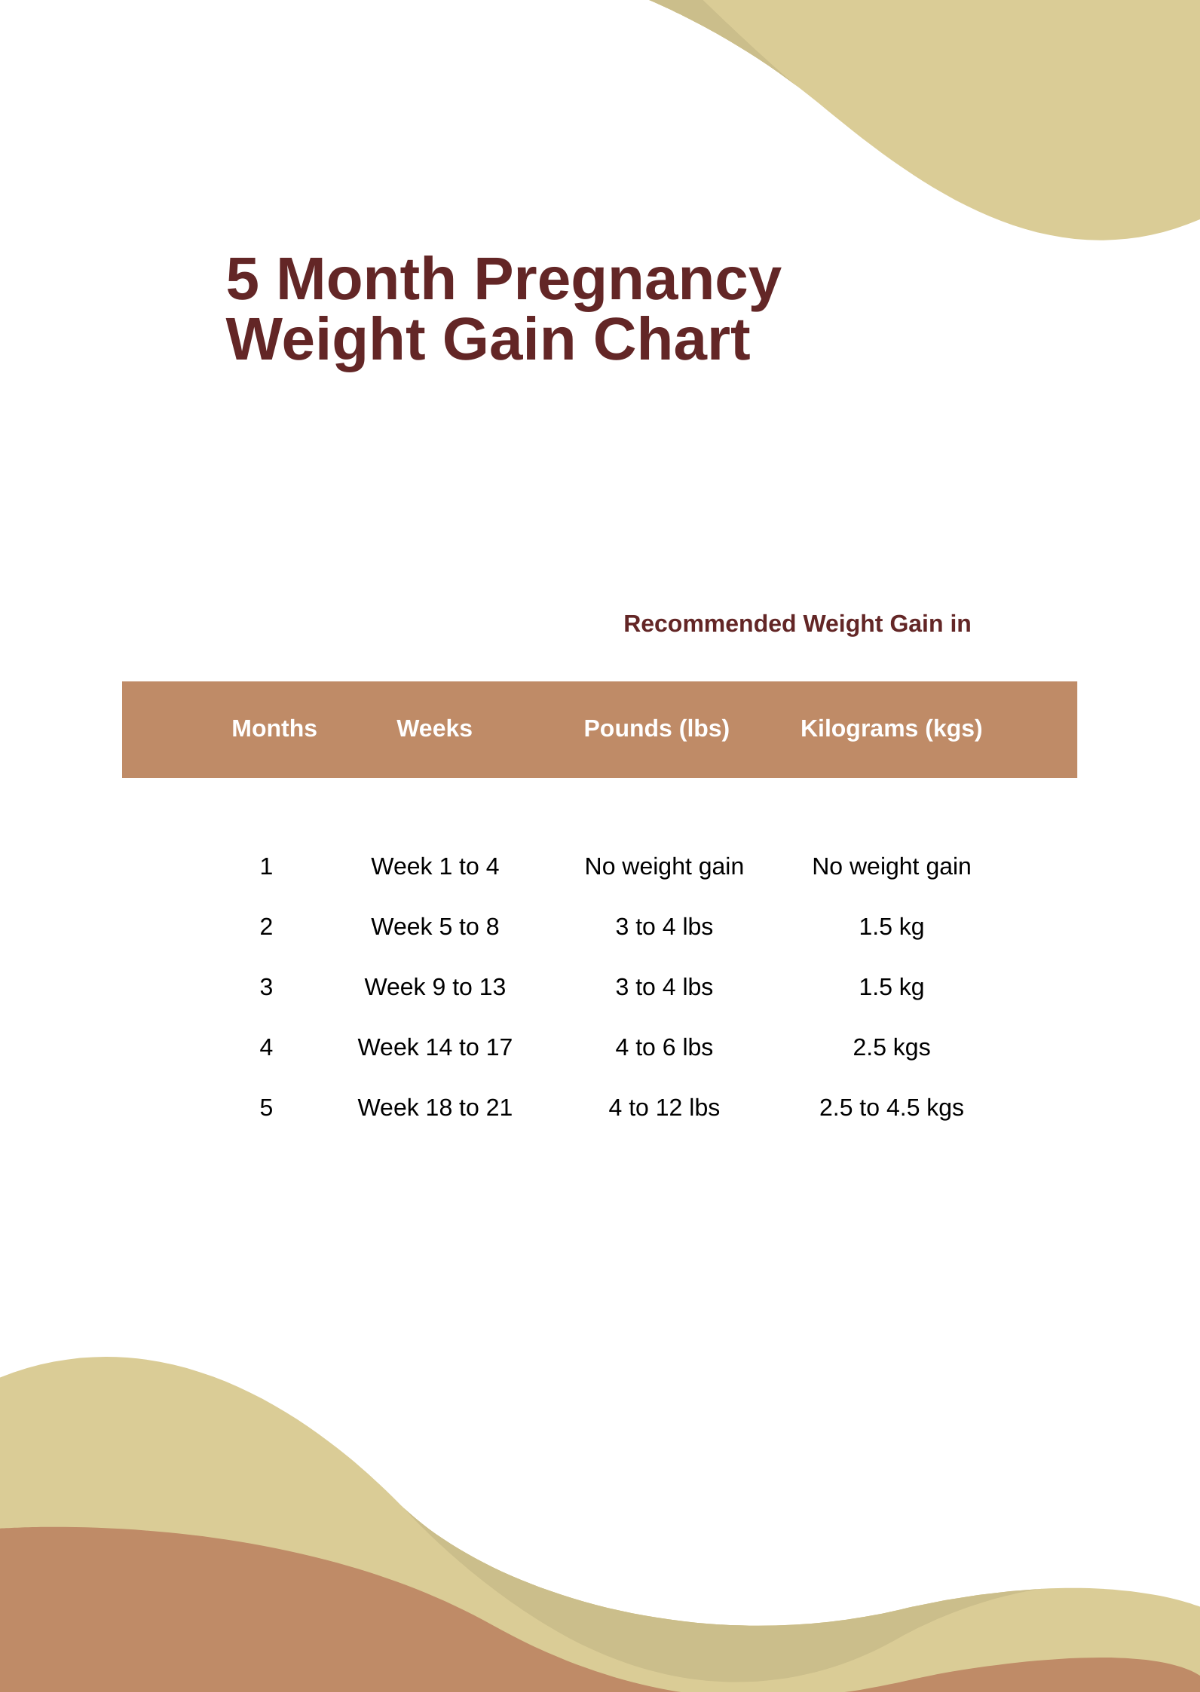 5 Month Pregnancy Weight Gain Chart Template